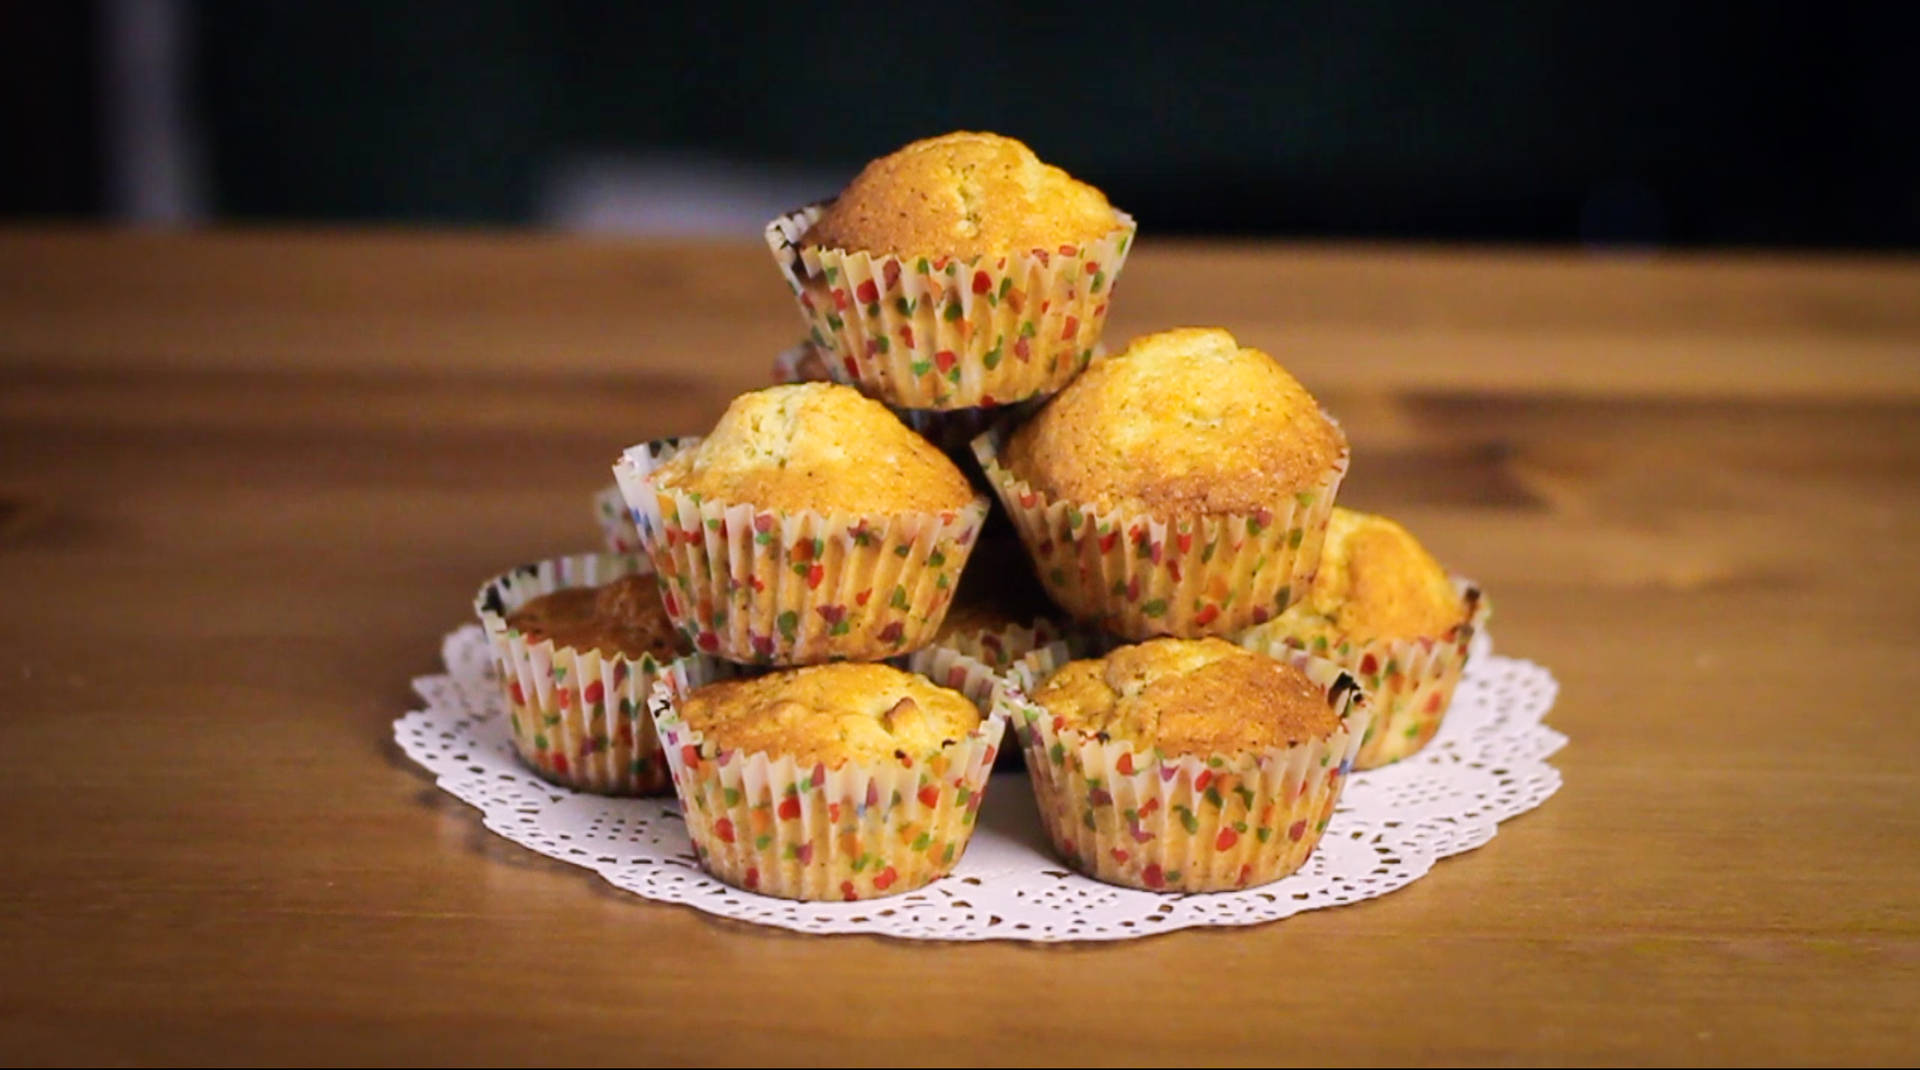 Muffin Pyramid On Table Wallpaper